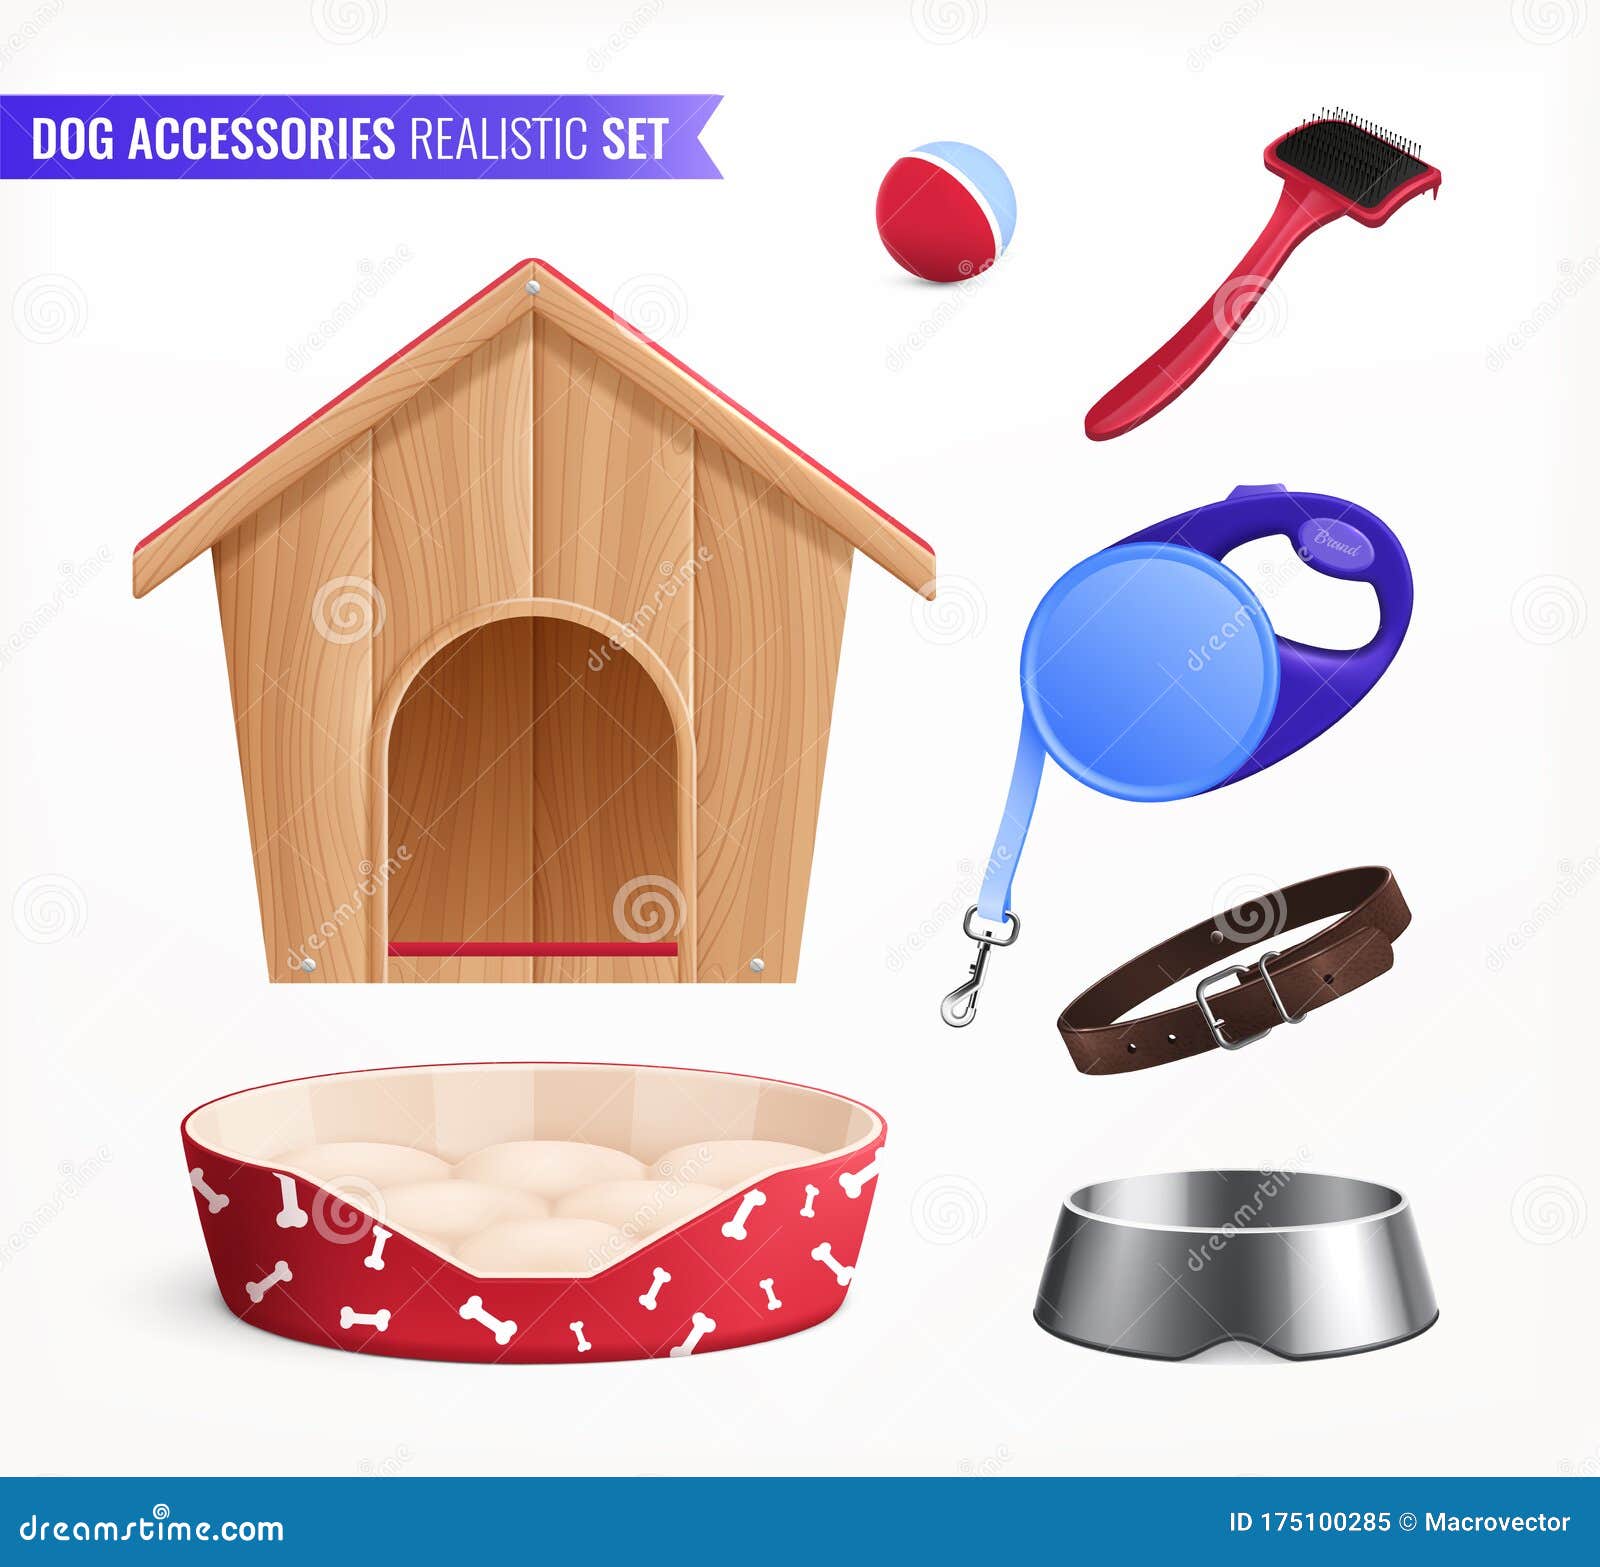 https://thumbs.dreamstime.com/z/dog-accessories-realistic-set-dog-accessories-realistic-set-booth-bowl-leash-collar-toys-playing-isolated-vector-175100285.jpg